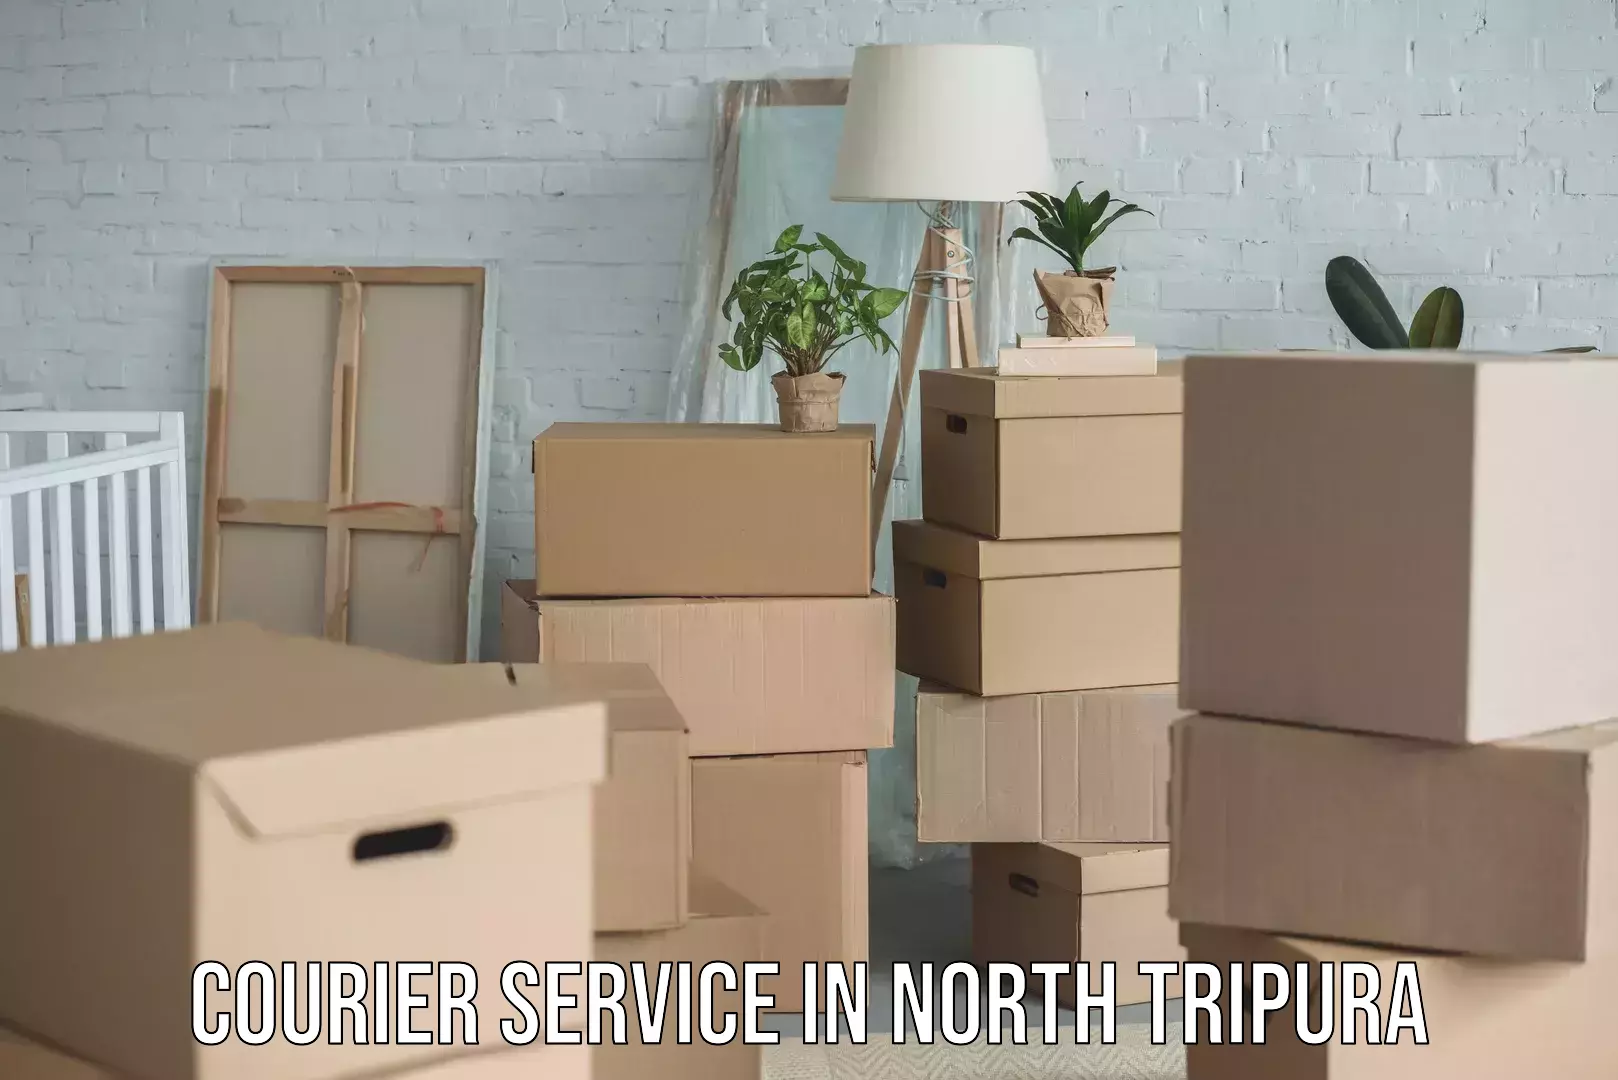 Full-service courier options in North Tripura